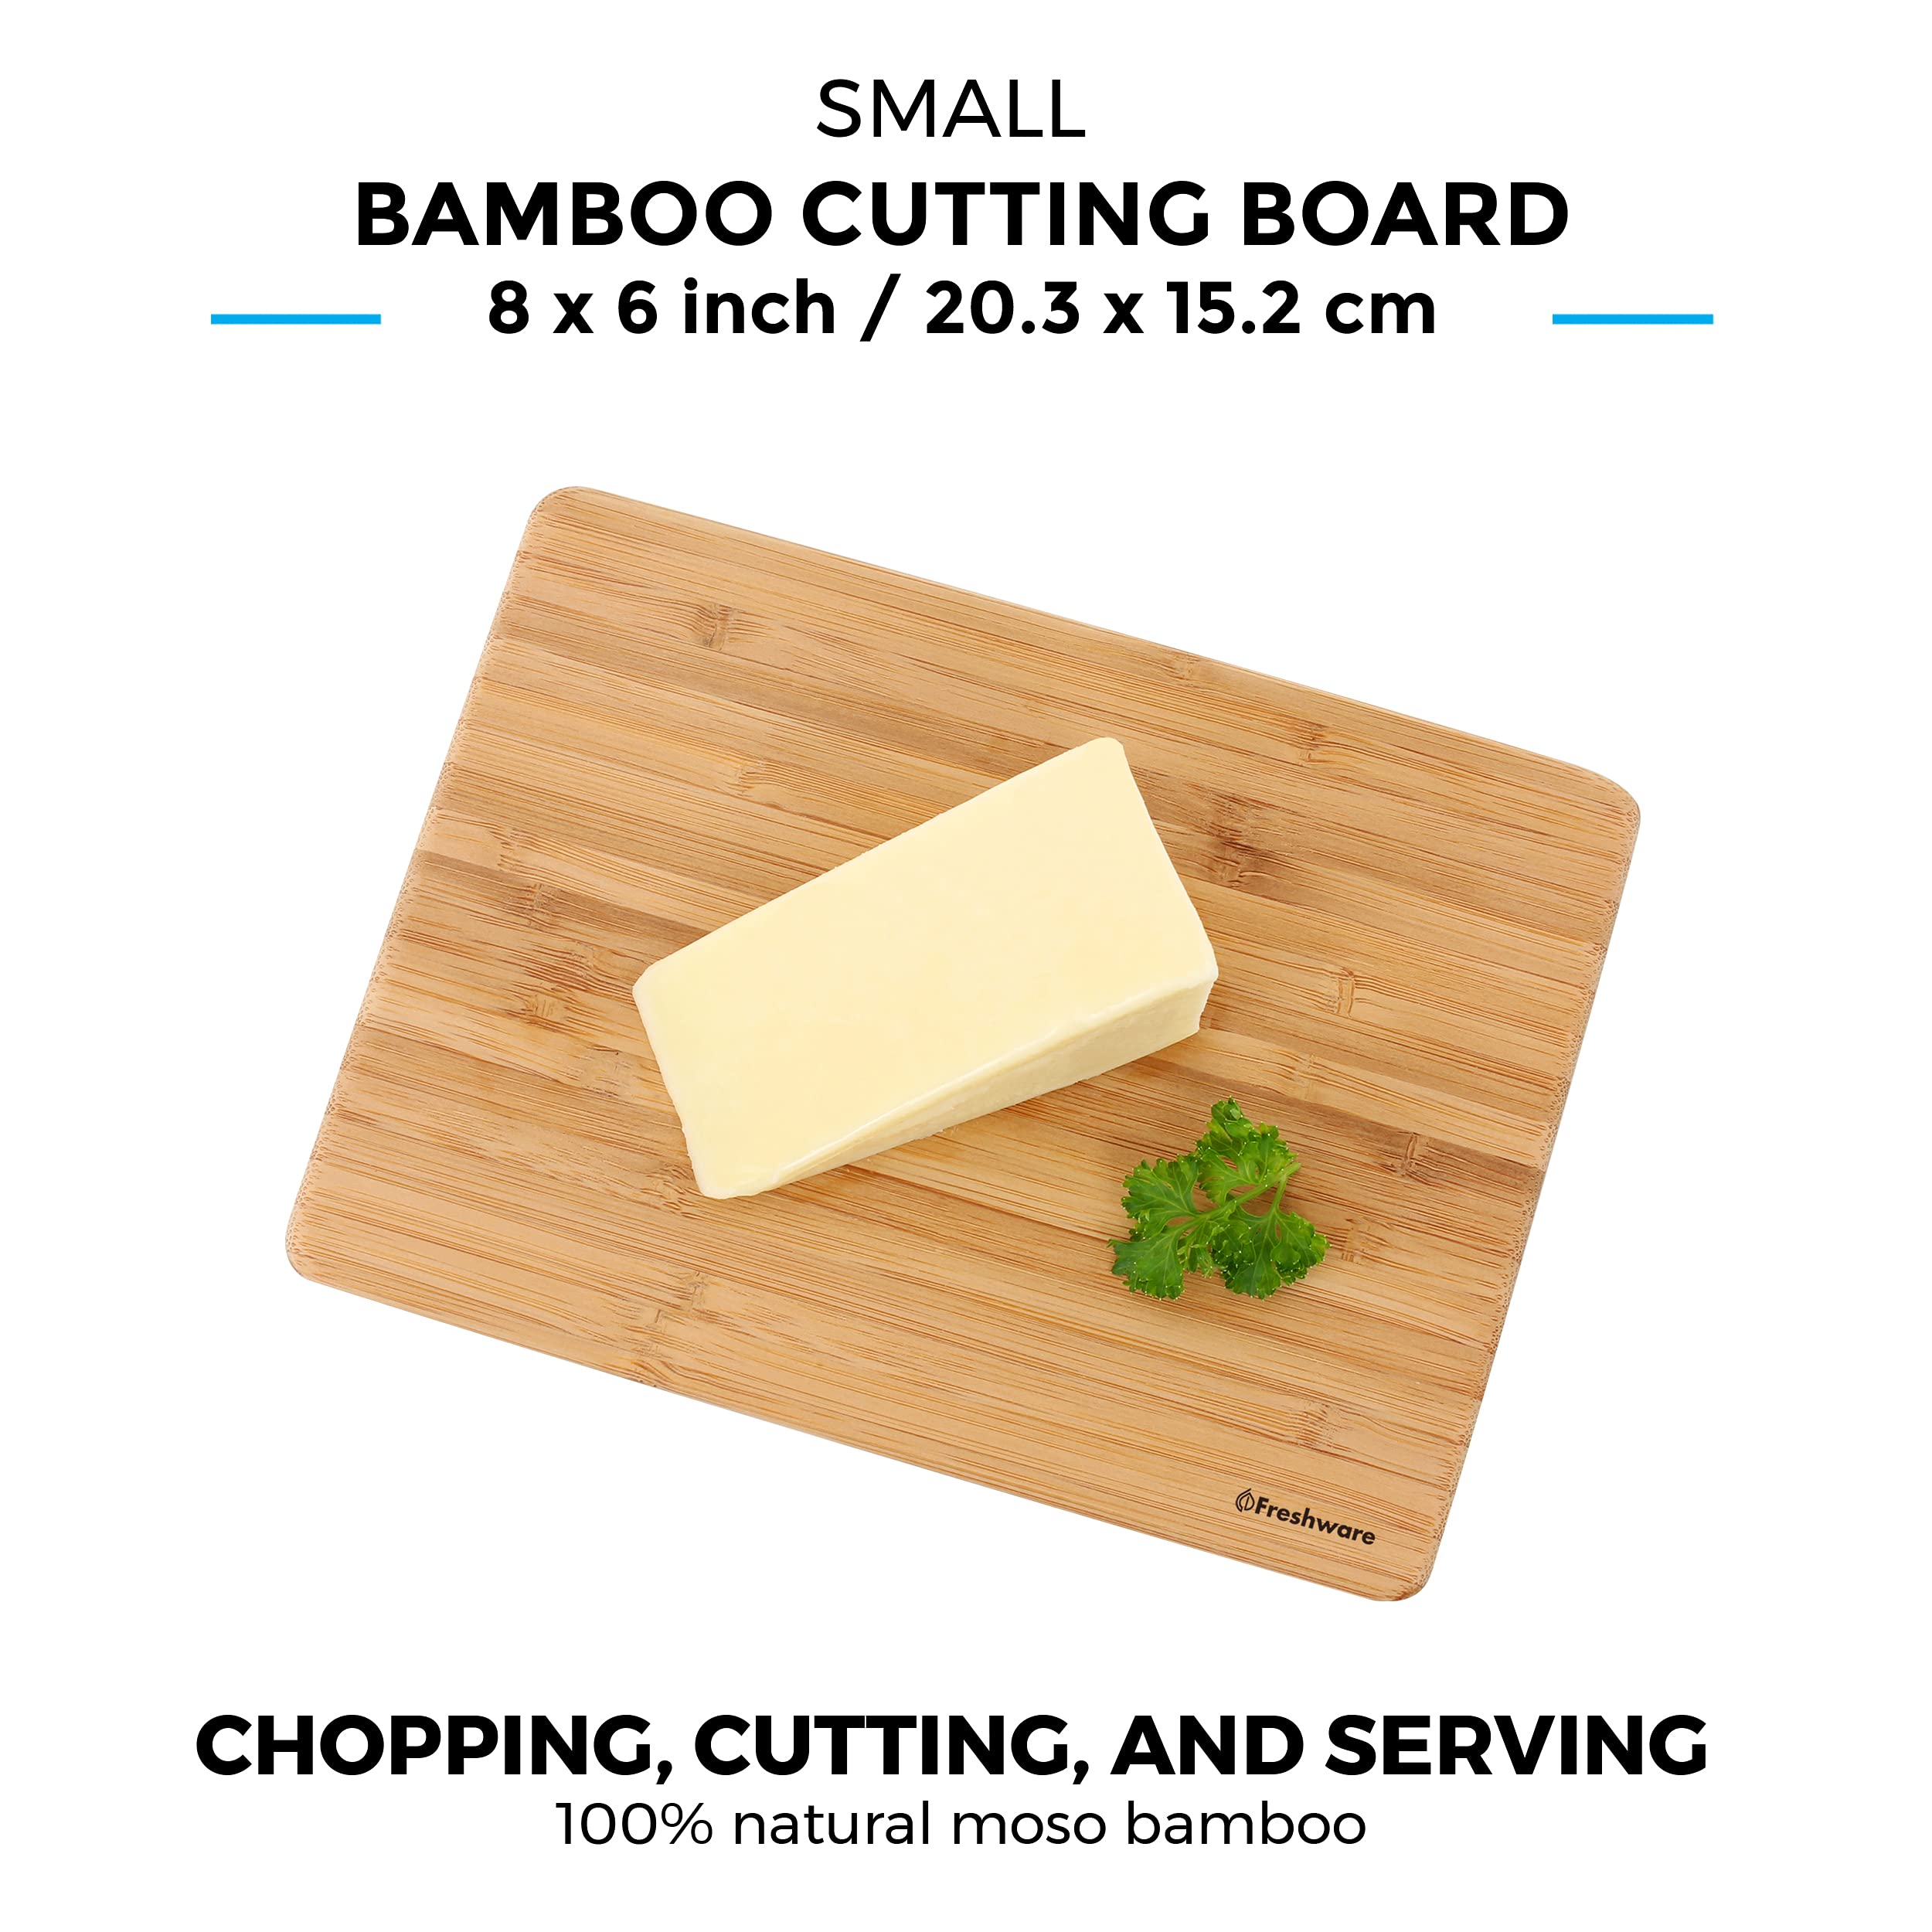 Freshware Bamboo Cutting Boards for Kitchen [Set of 3] Wood Cutting Board for Chopping Meat, Vegetables, Fruits, Cheese, Knife Friendly Se